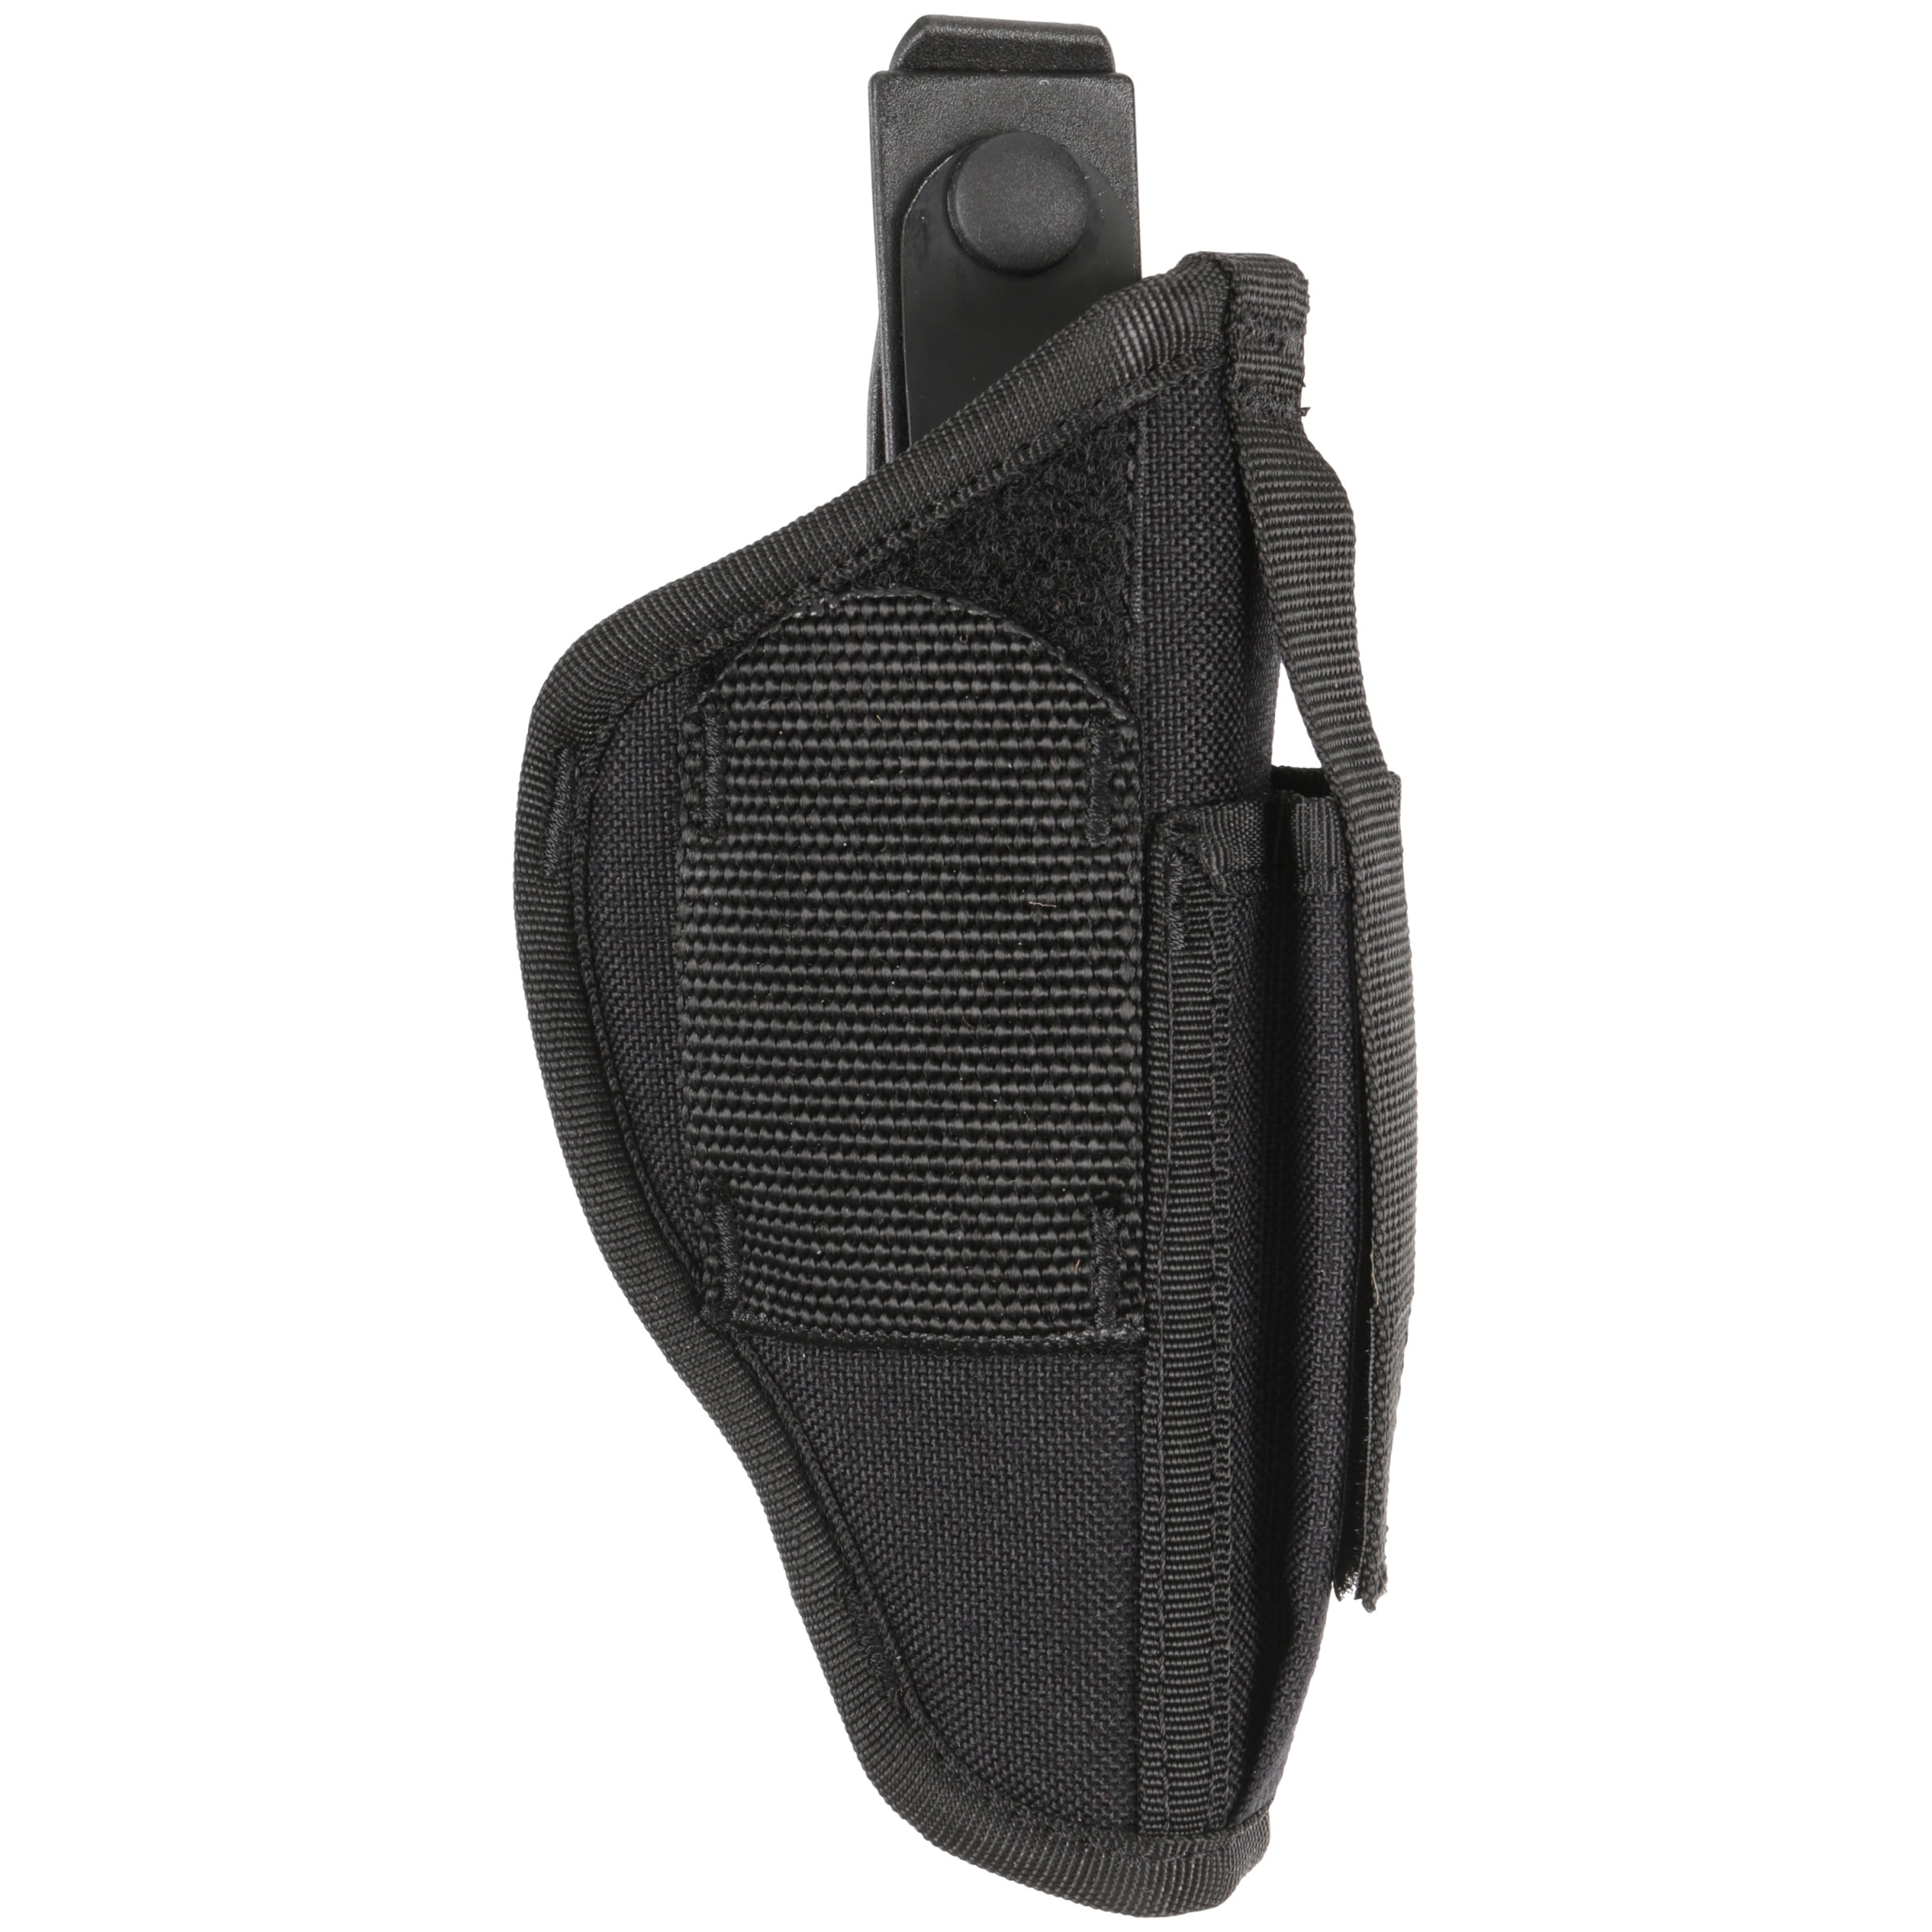 UNCLE MIKES SIDEKICK HIP HOLSTER W/MAG POUCH NYLON BLACK - Walmart.com ...